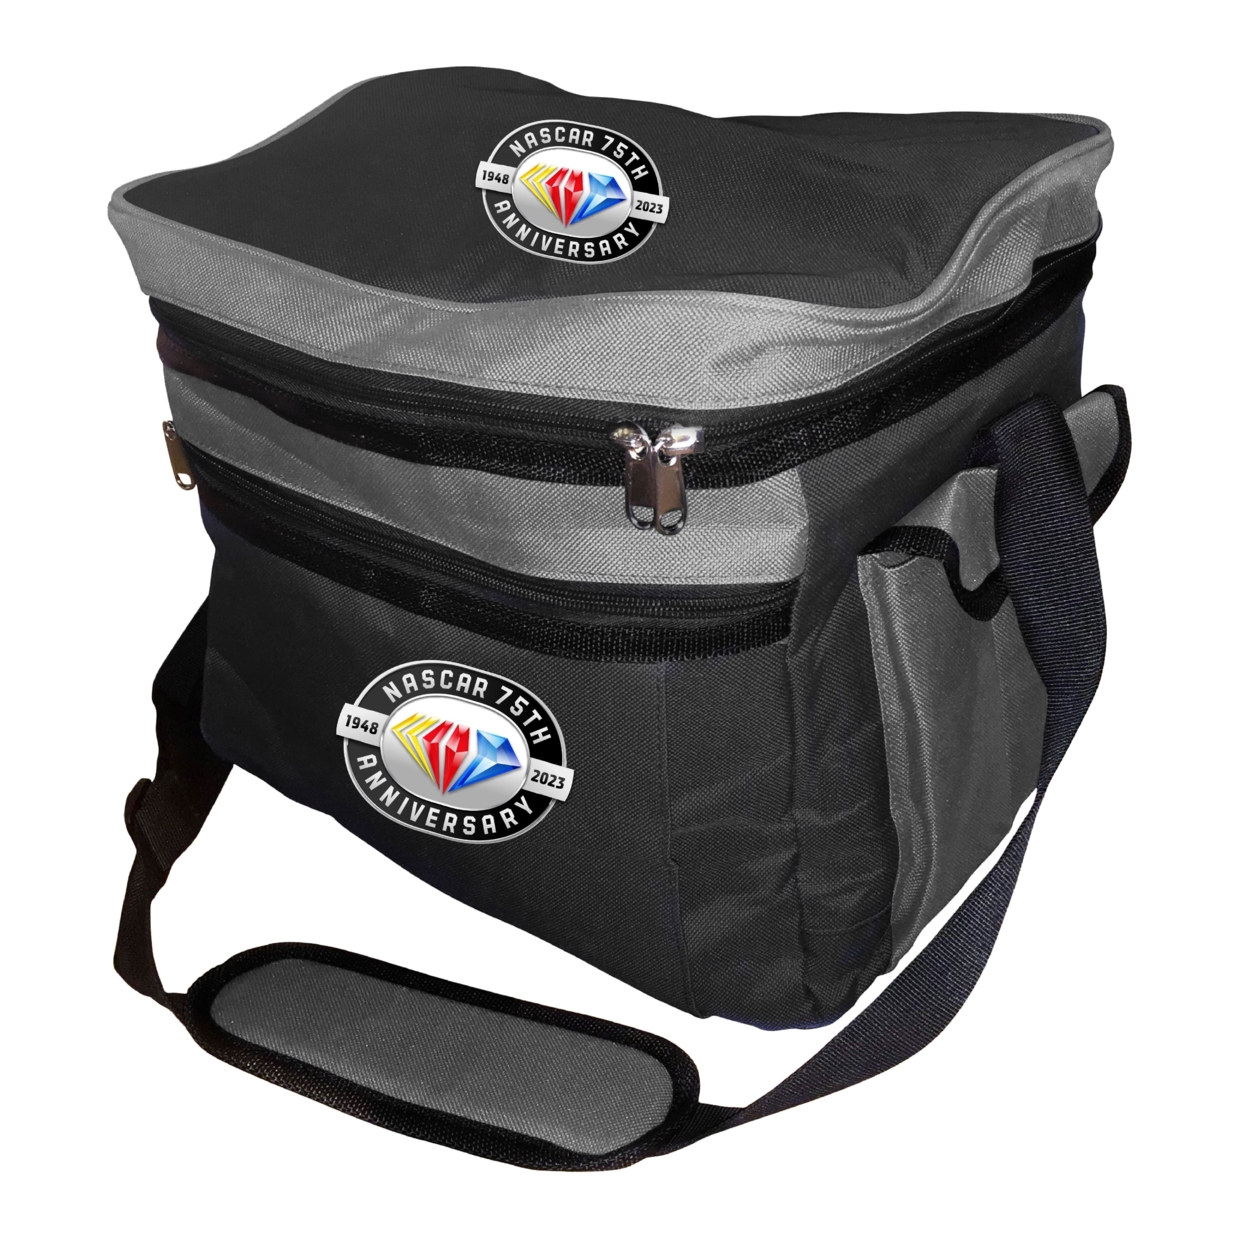 NASCAR 75 Year Anniversary Officially Licensed 24 Pack Cooler Bag